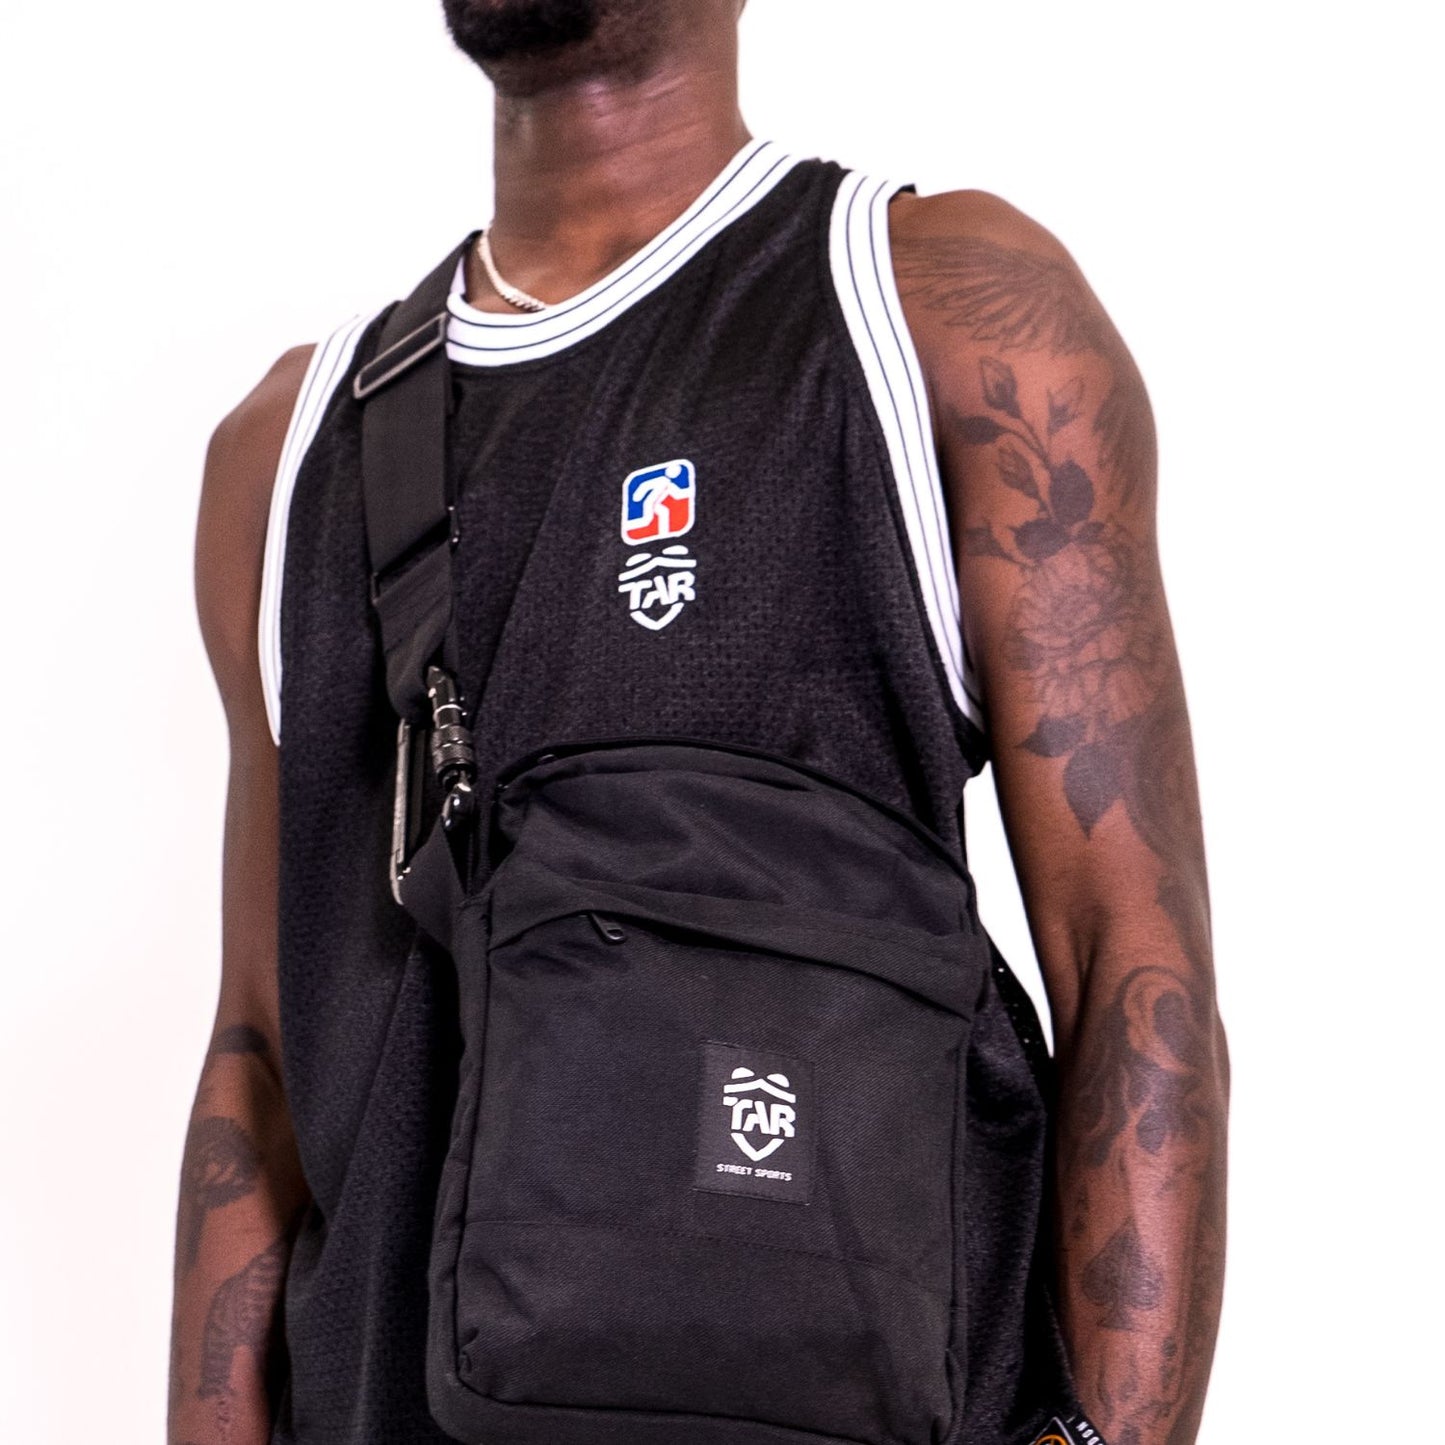 TAR Relaxed Fit Basketball Jersey - Mens Vest